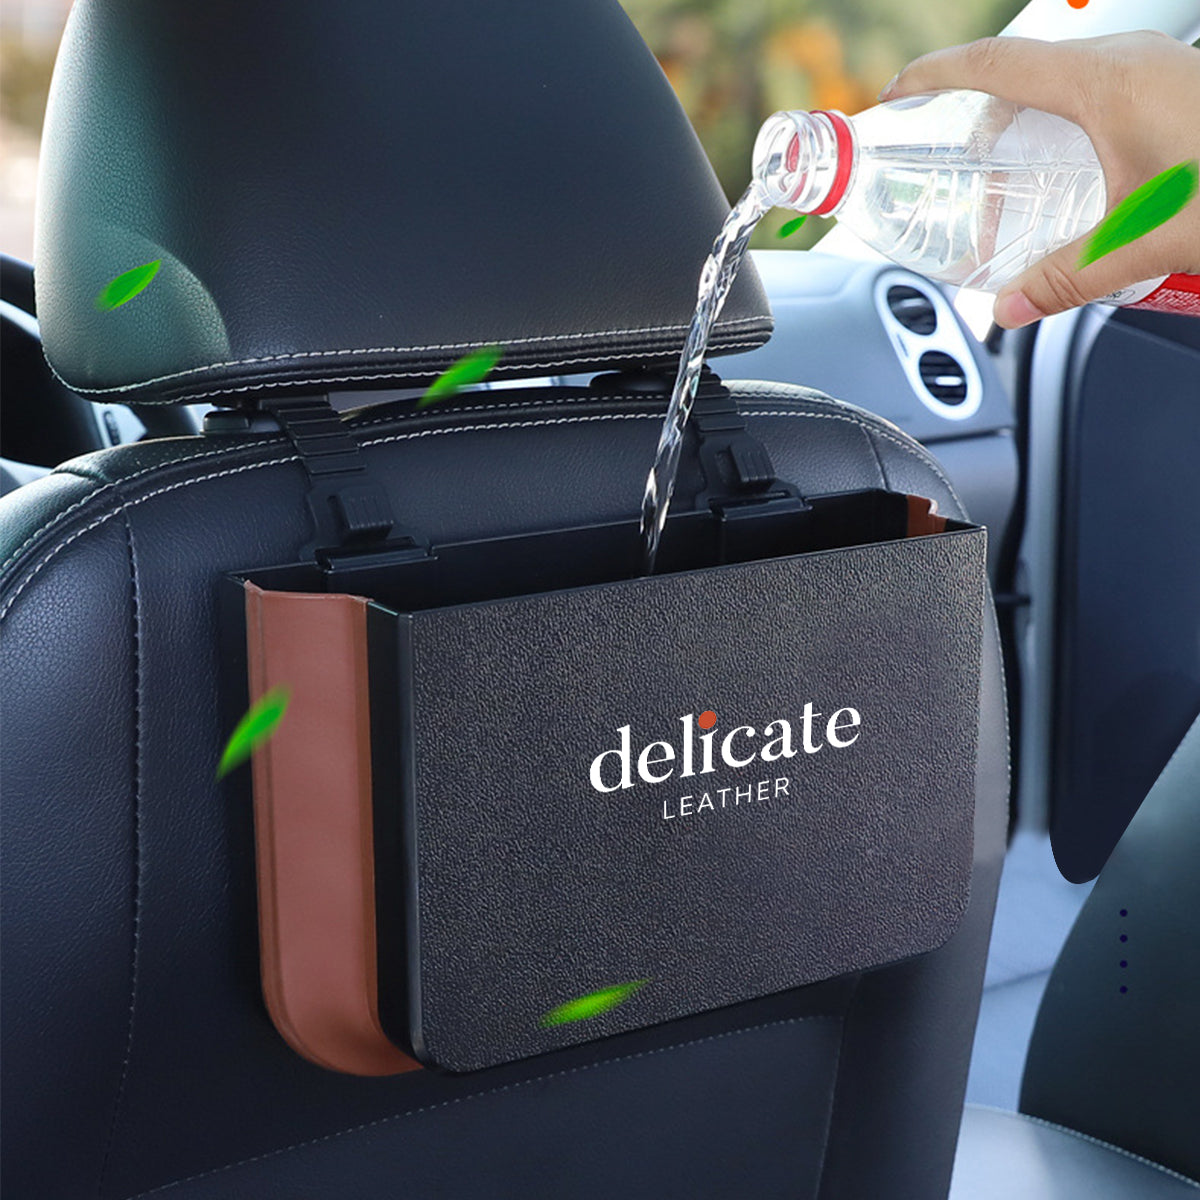 Delicate Leather Hanging Waterproof Car Trash can-Foldable, Custom For Your Cars, Waterproof, and Equipped with Cup Holders and Trays. Multi-Purpose, Car Accessories LM11992